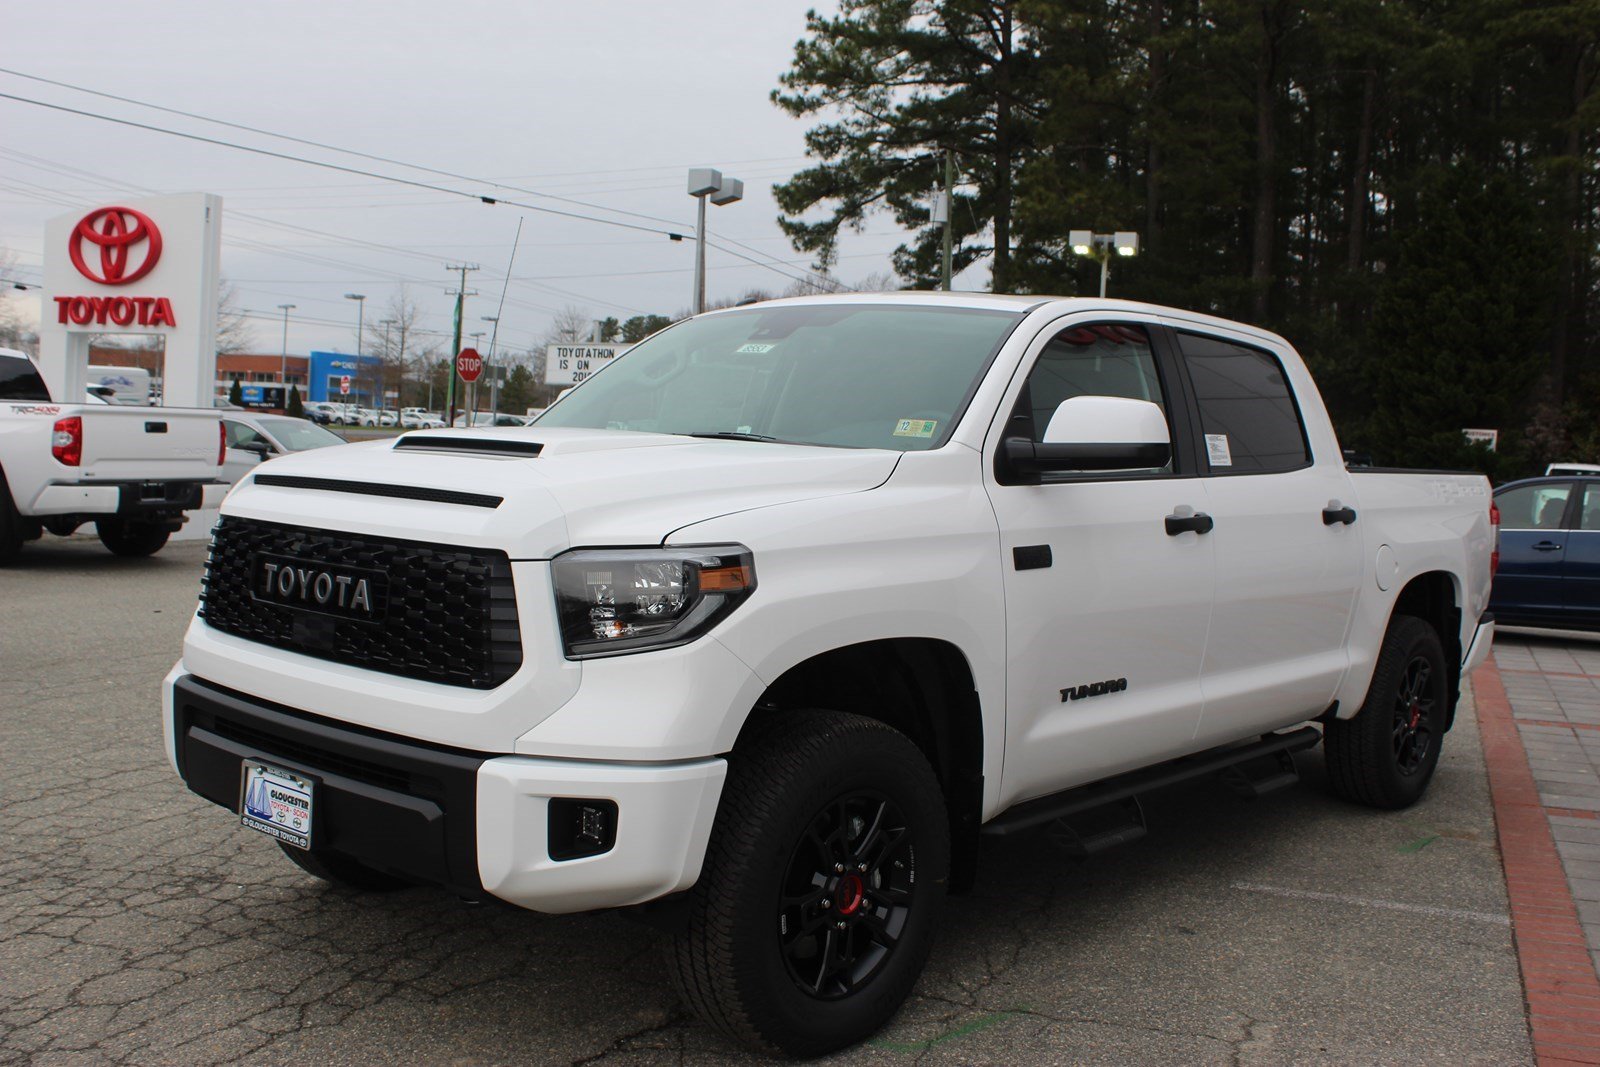 New 2019 Toyota Tundra 4WD TRD Pro Crew Cab Pickup in Gloucester #8553